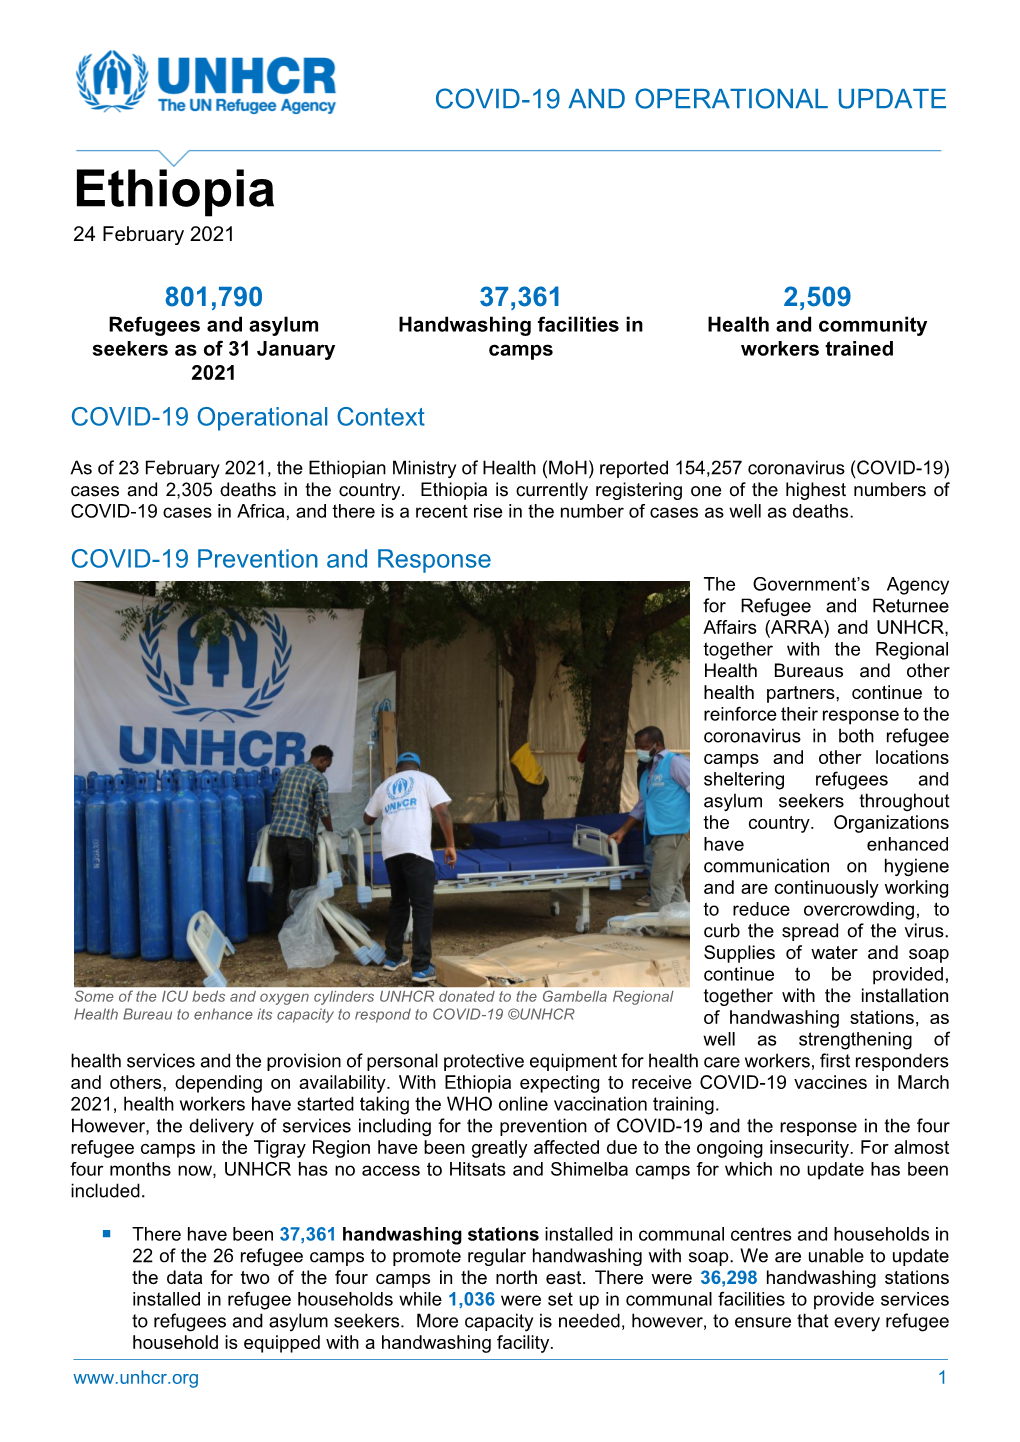 UNHCR Ethiopia COVID-19 and Operational Update